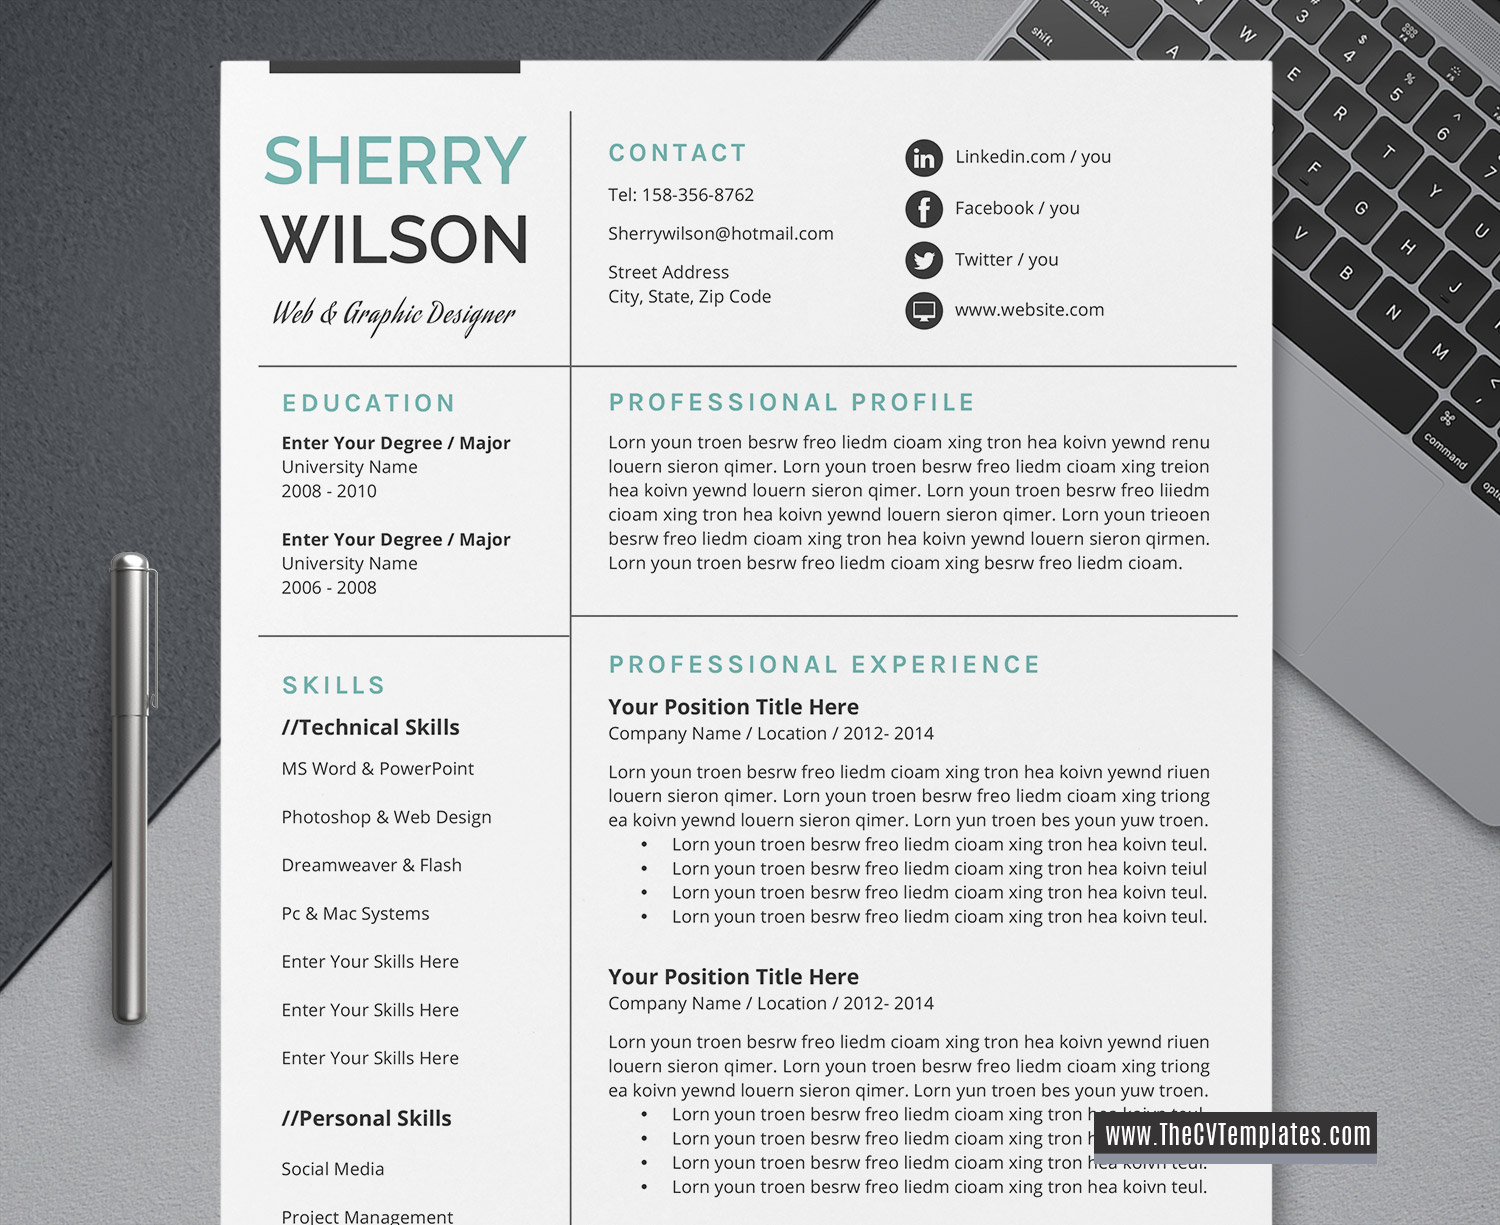 Welp 2020 Professional and Creative CV Template and Resume Template, 1 UD-84